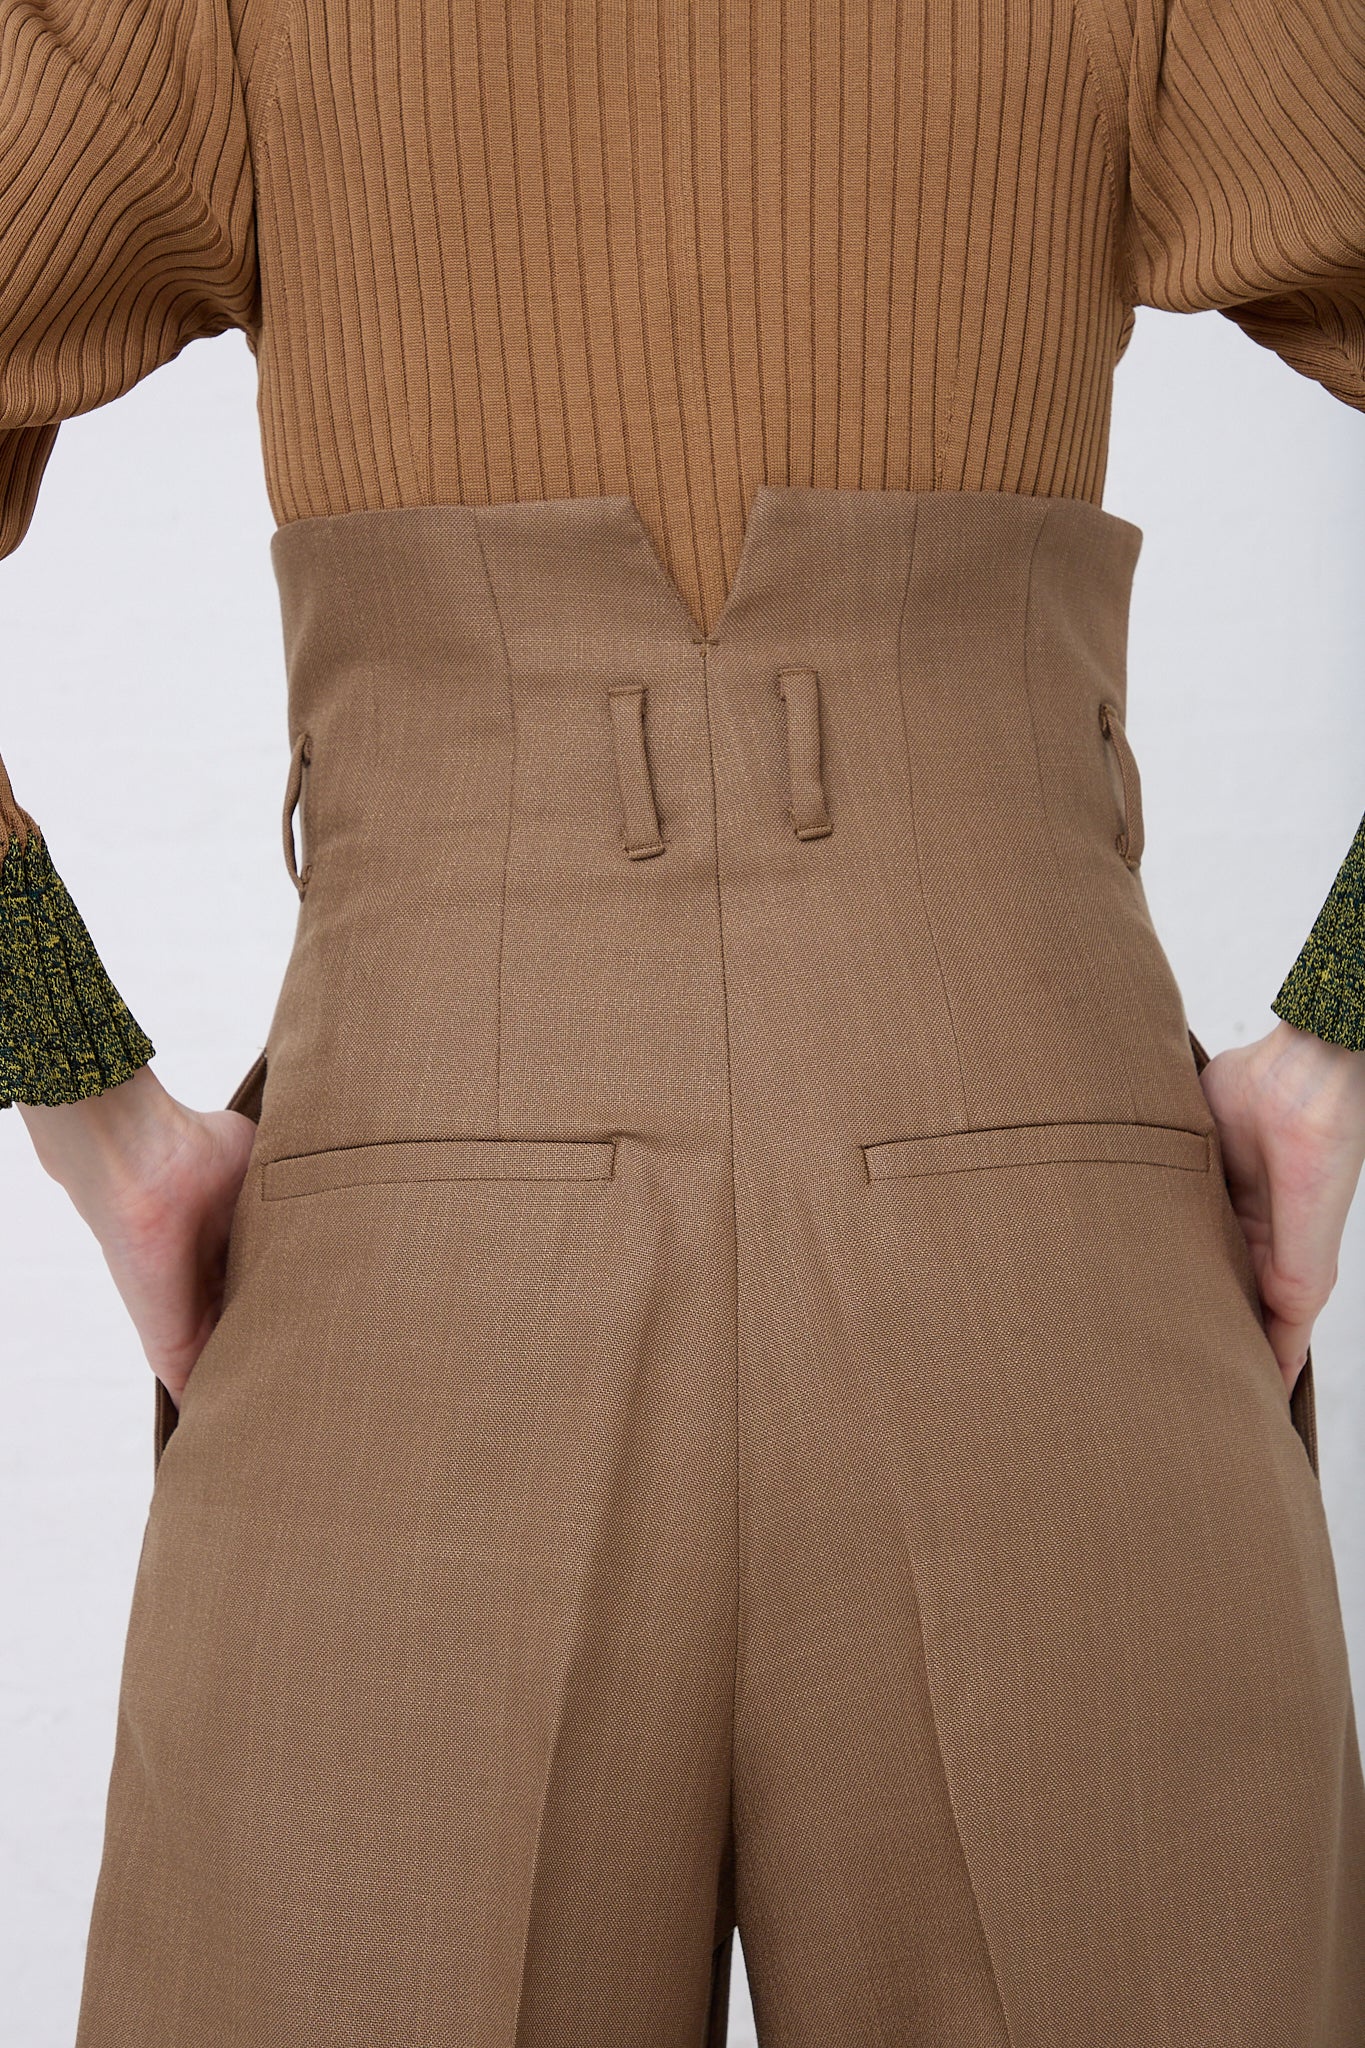 The back view of a woman wearing TOGA PULLA brown high waist trousers made of a woven rayon blend fabric.